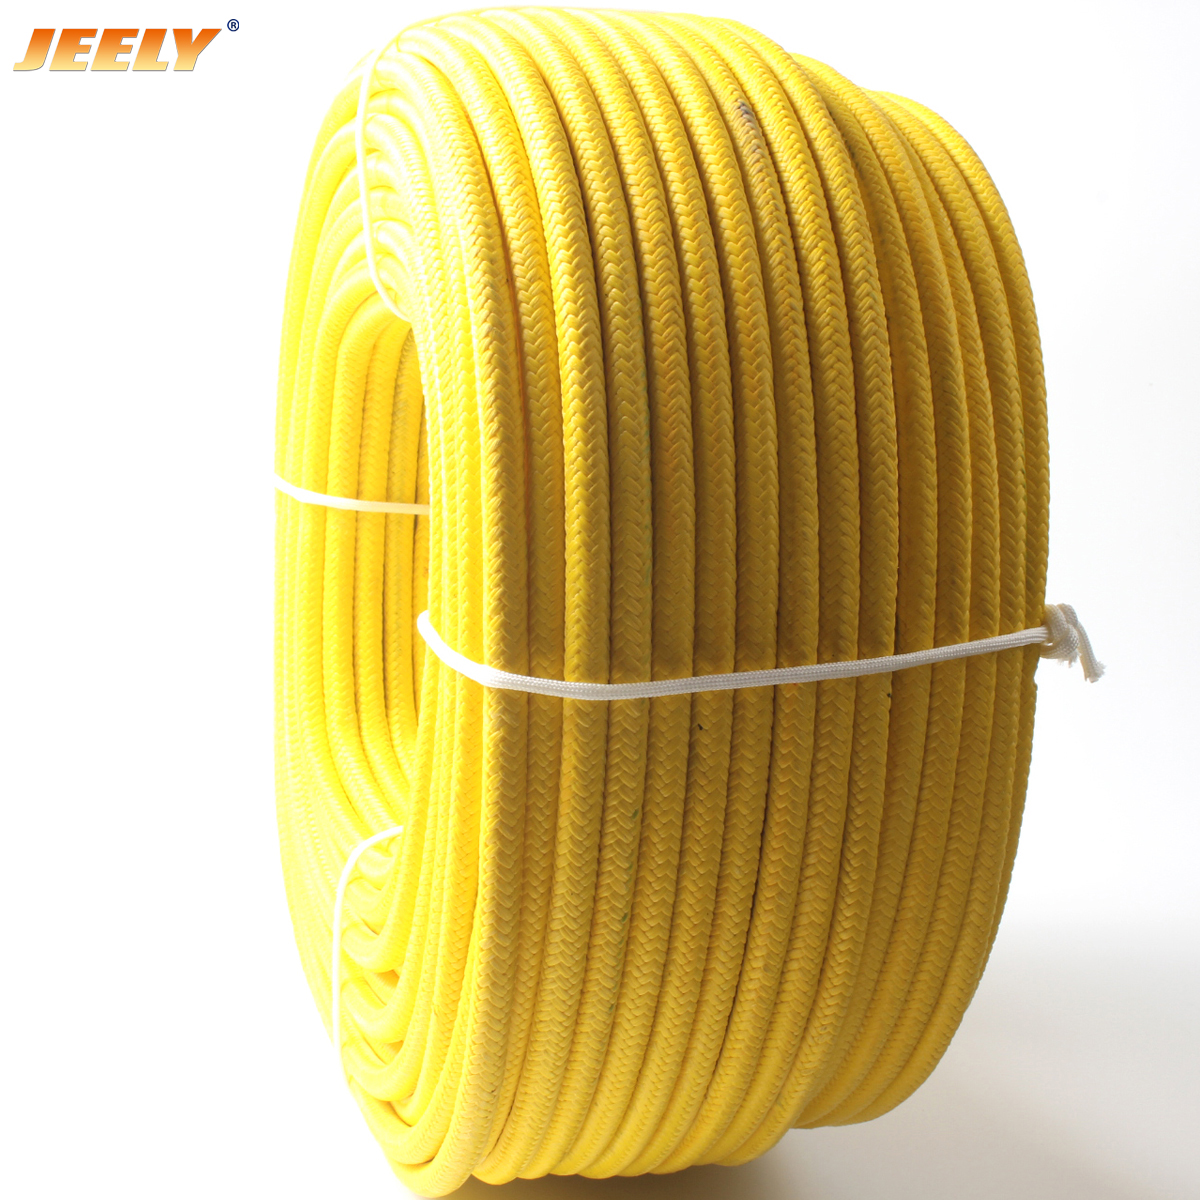 14mm 100m UHMWPE Spectra Core with UHMWPE Jacket Sailboat Winch Spectra Sheathed Tow Rope